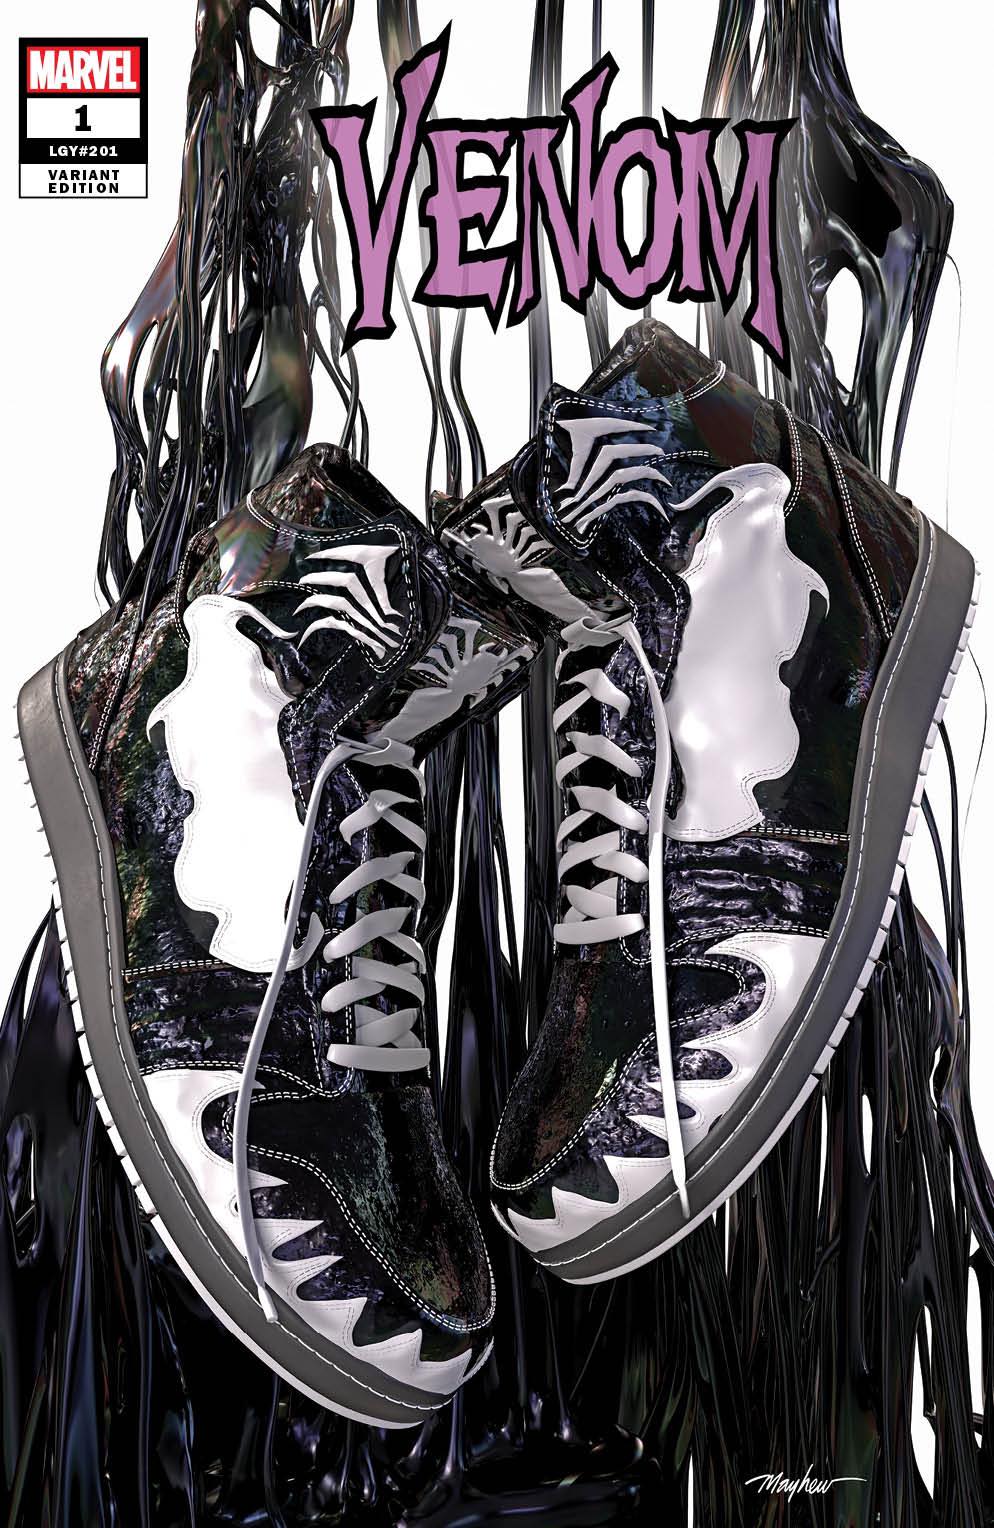 VENOM #1 MIKE MAYHEW SNEAKERHEADS TRADE DRESS VARIANT LIMITED TO 3000